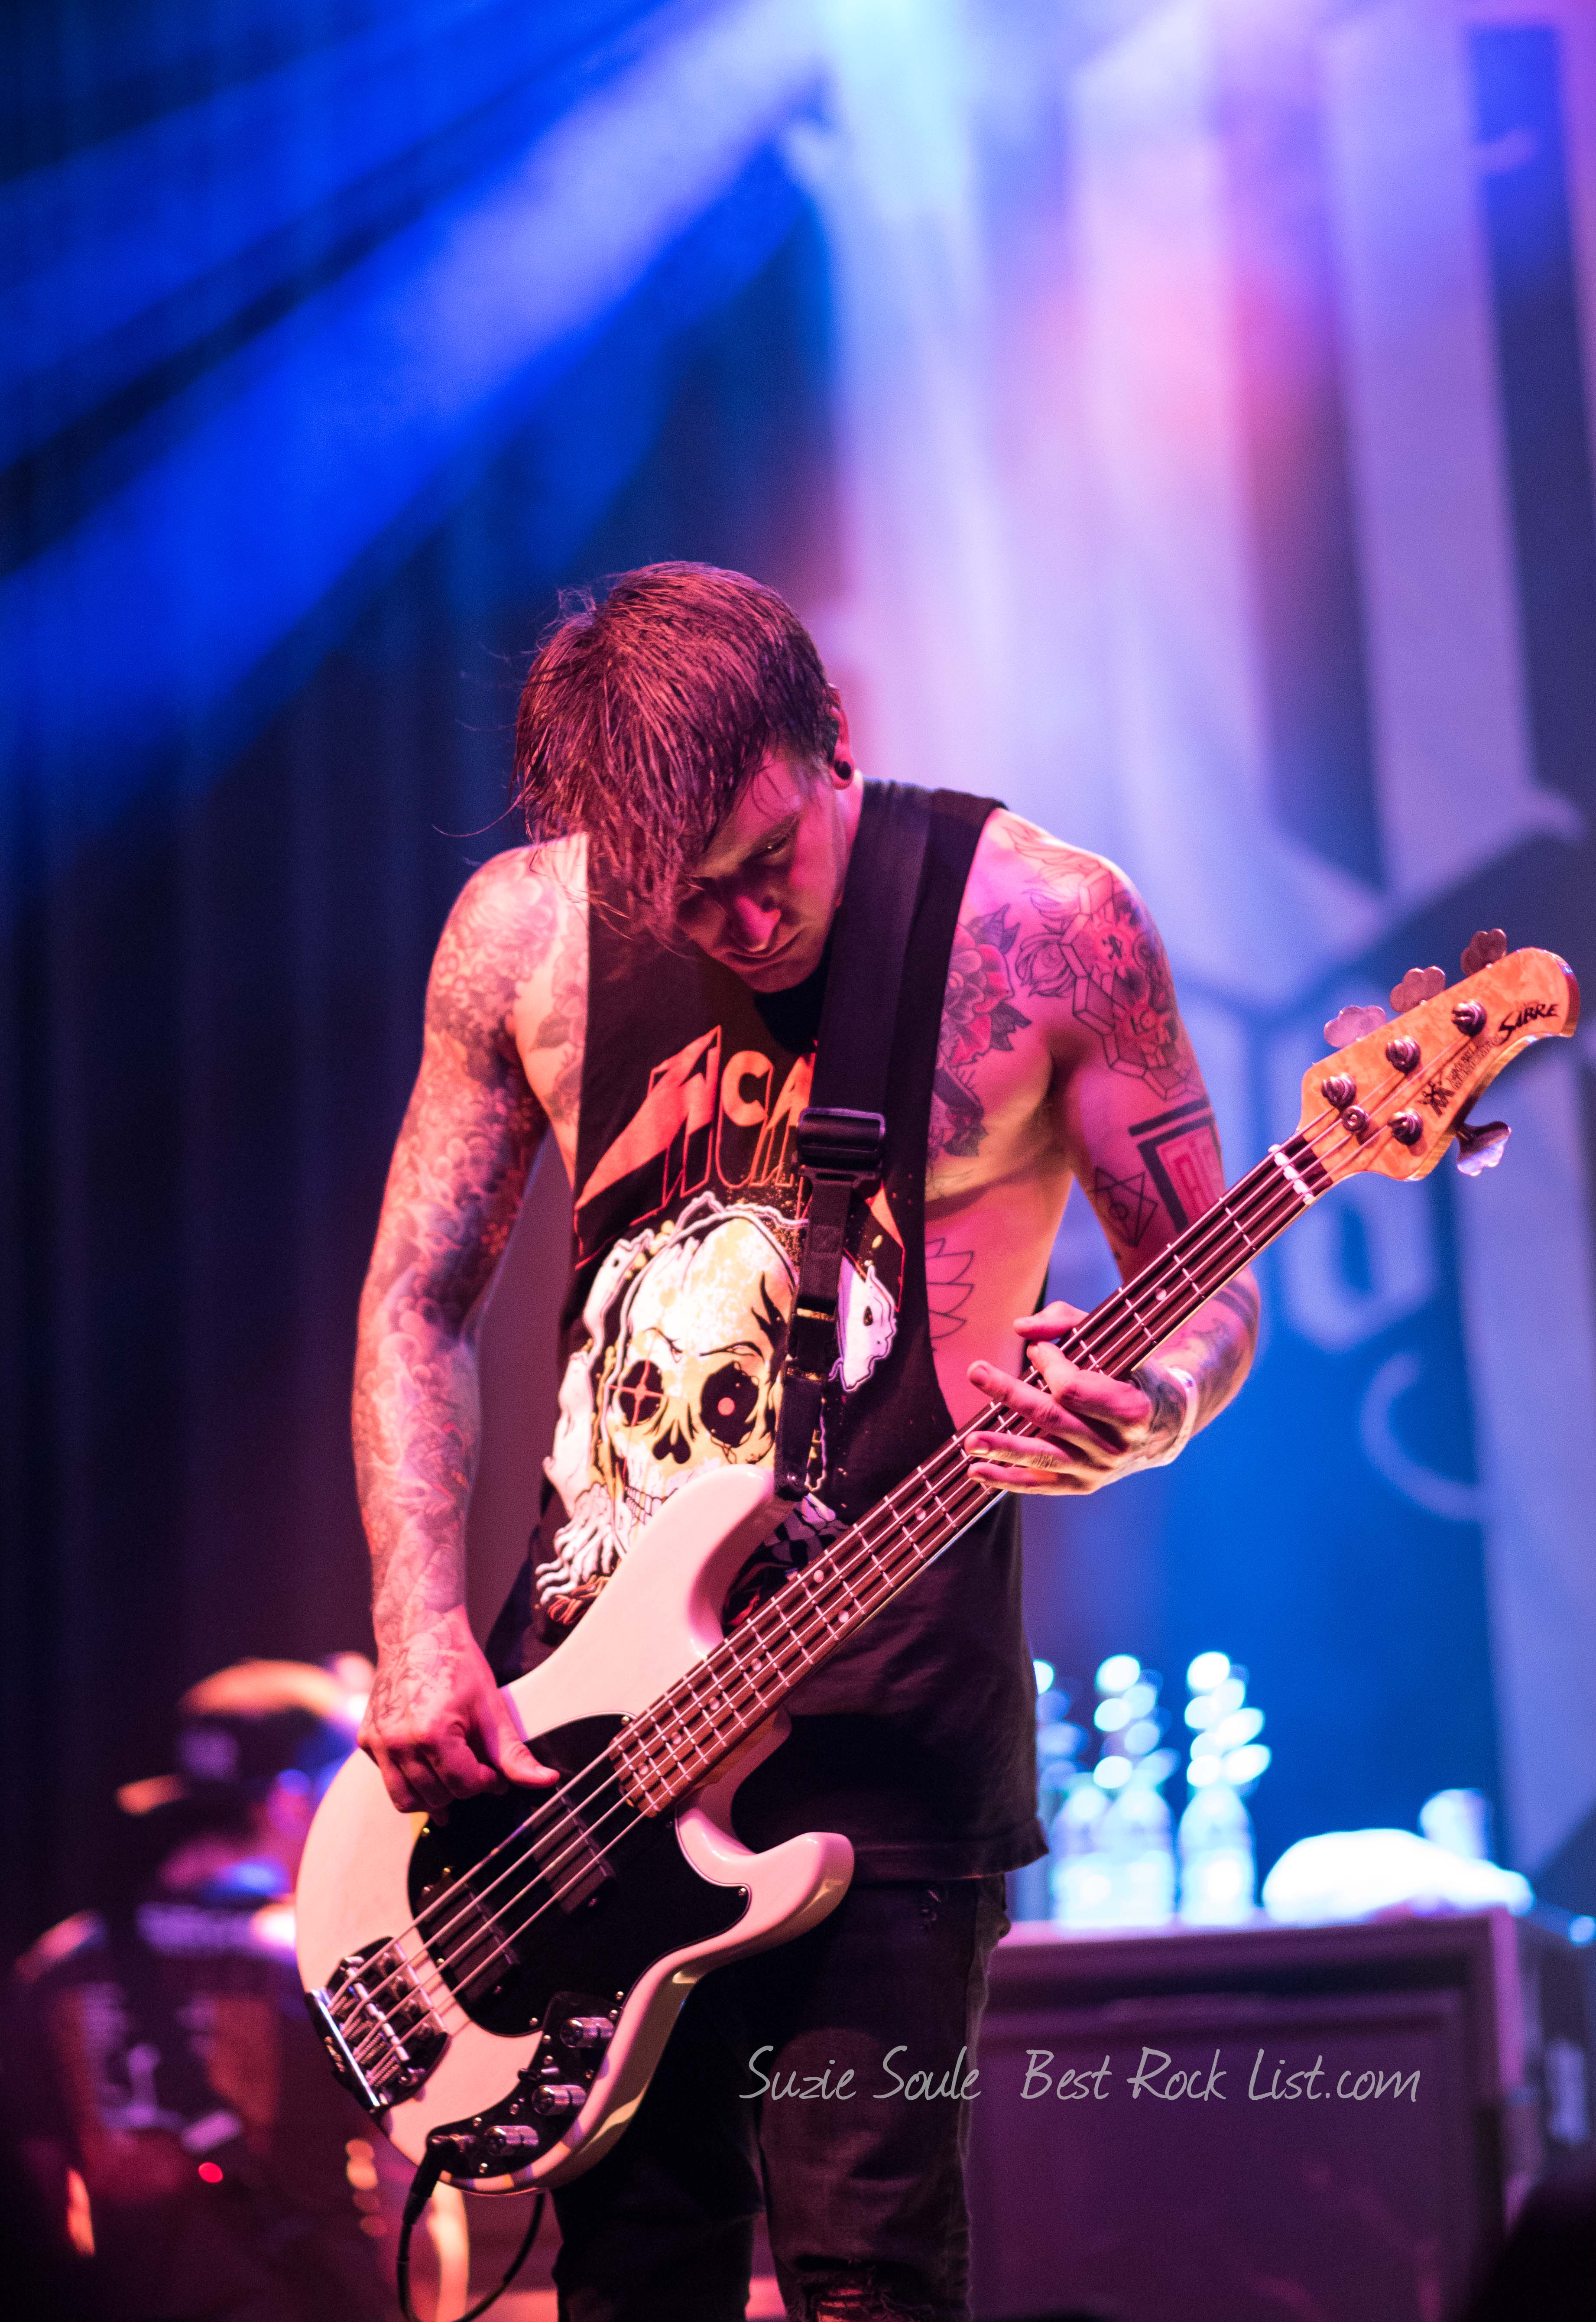 Andy Glass of We Came As Romans